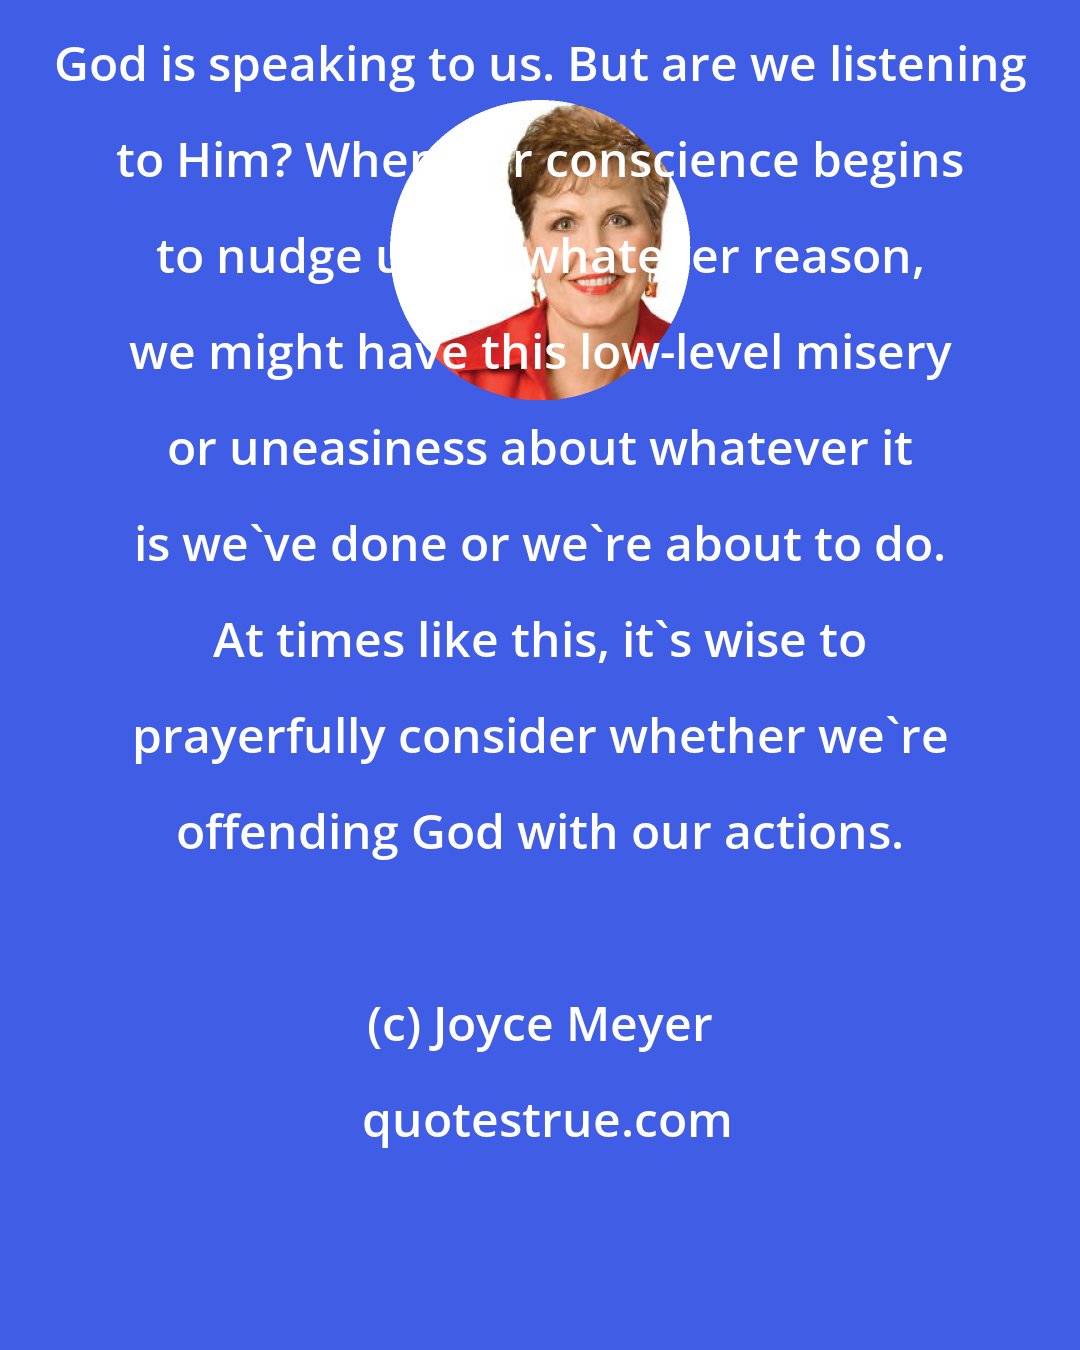 Joyce Meyer: God is speaking to us. But are we listening to Him? When our conscience begins to nudge us for whatever reason, we might have this low-level misery or uneasiness about whatever it is we've done or we're about to do. At times like this, it's wise to prayerfully consider whether we're offending God with our actions.